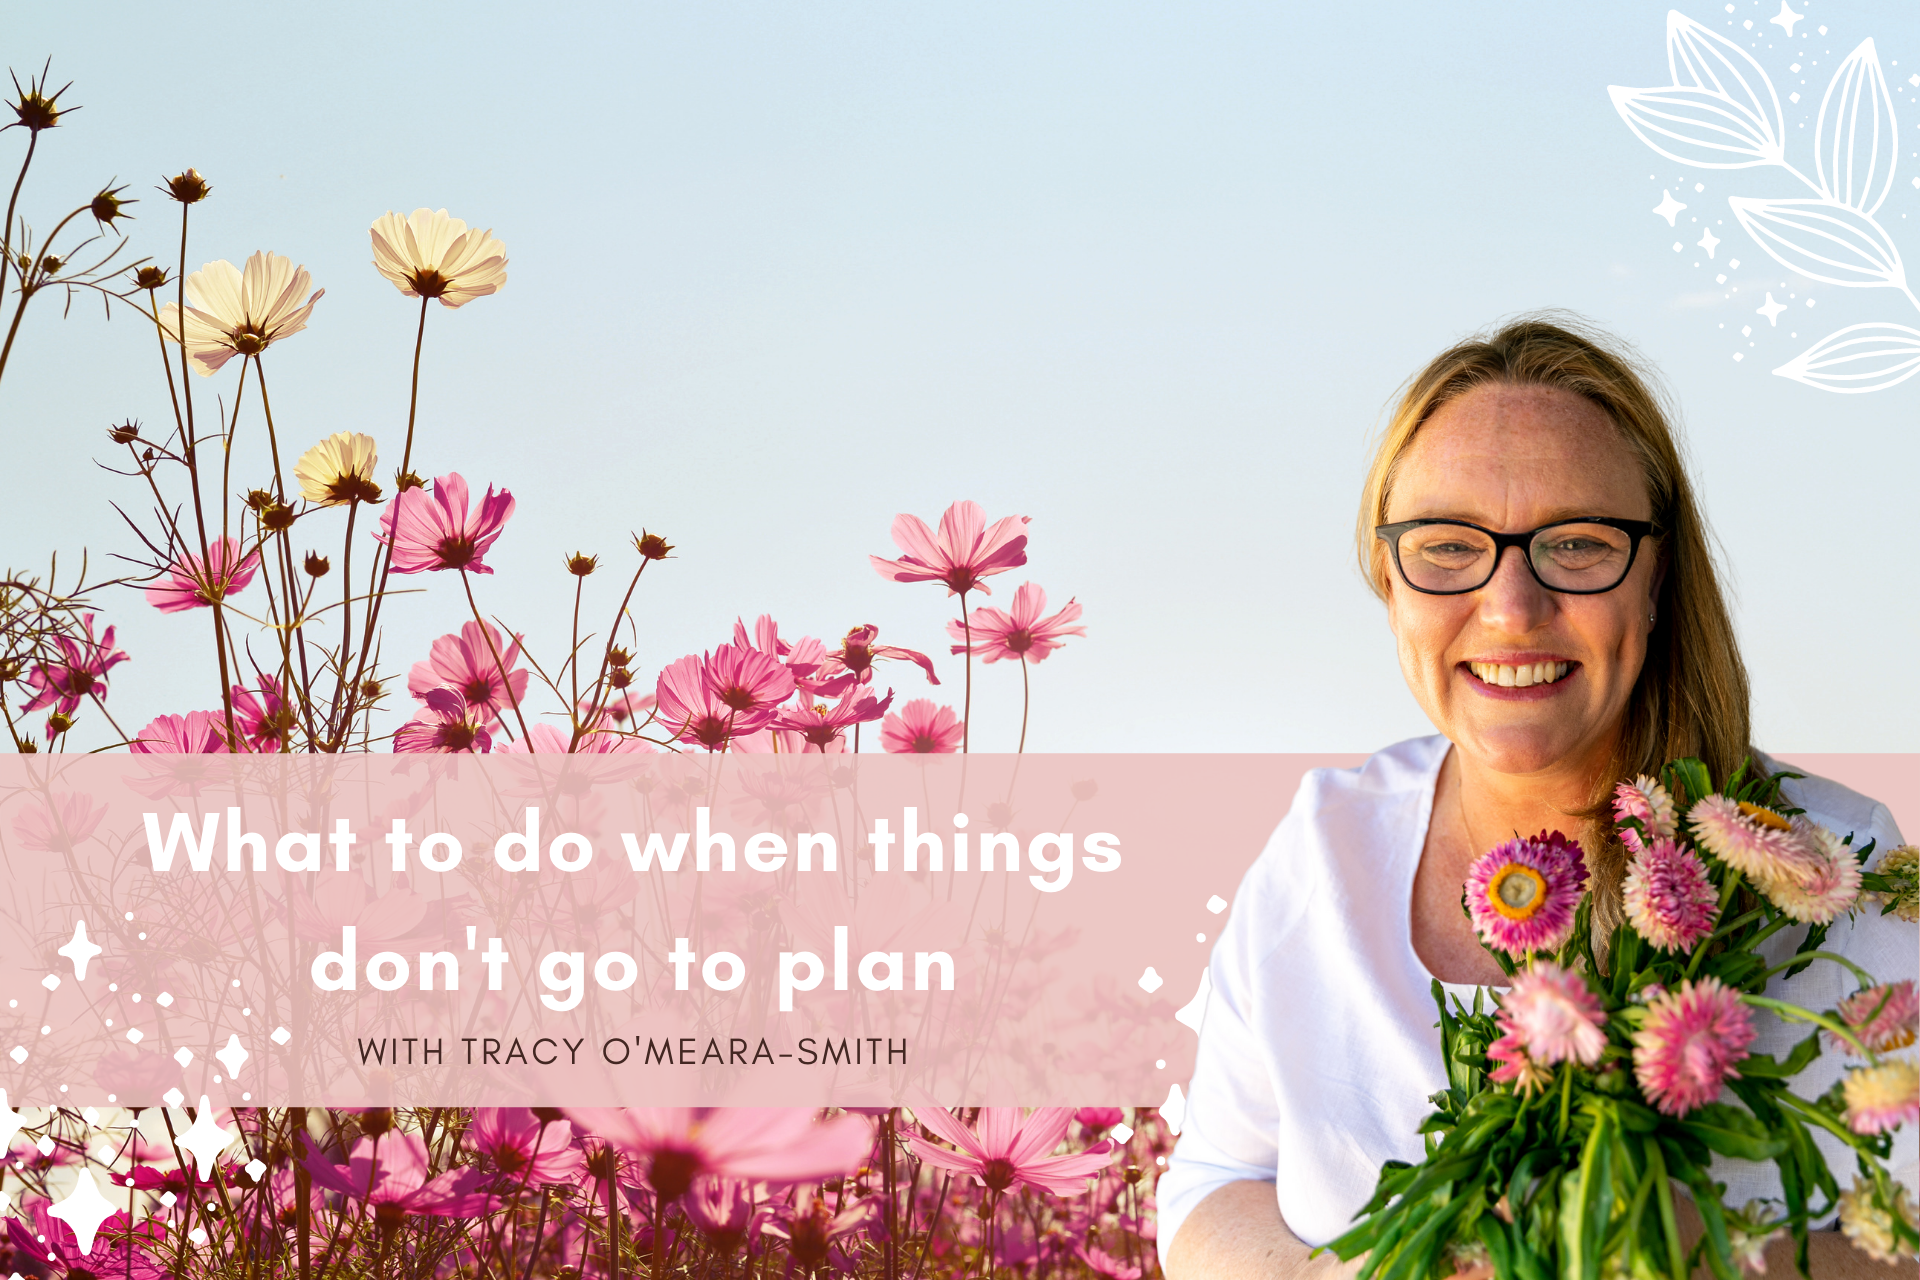 What to do when things don't go to plan